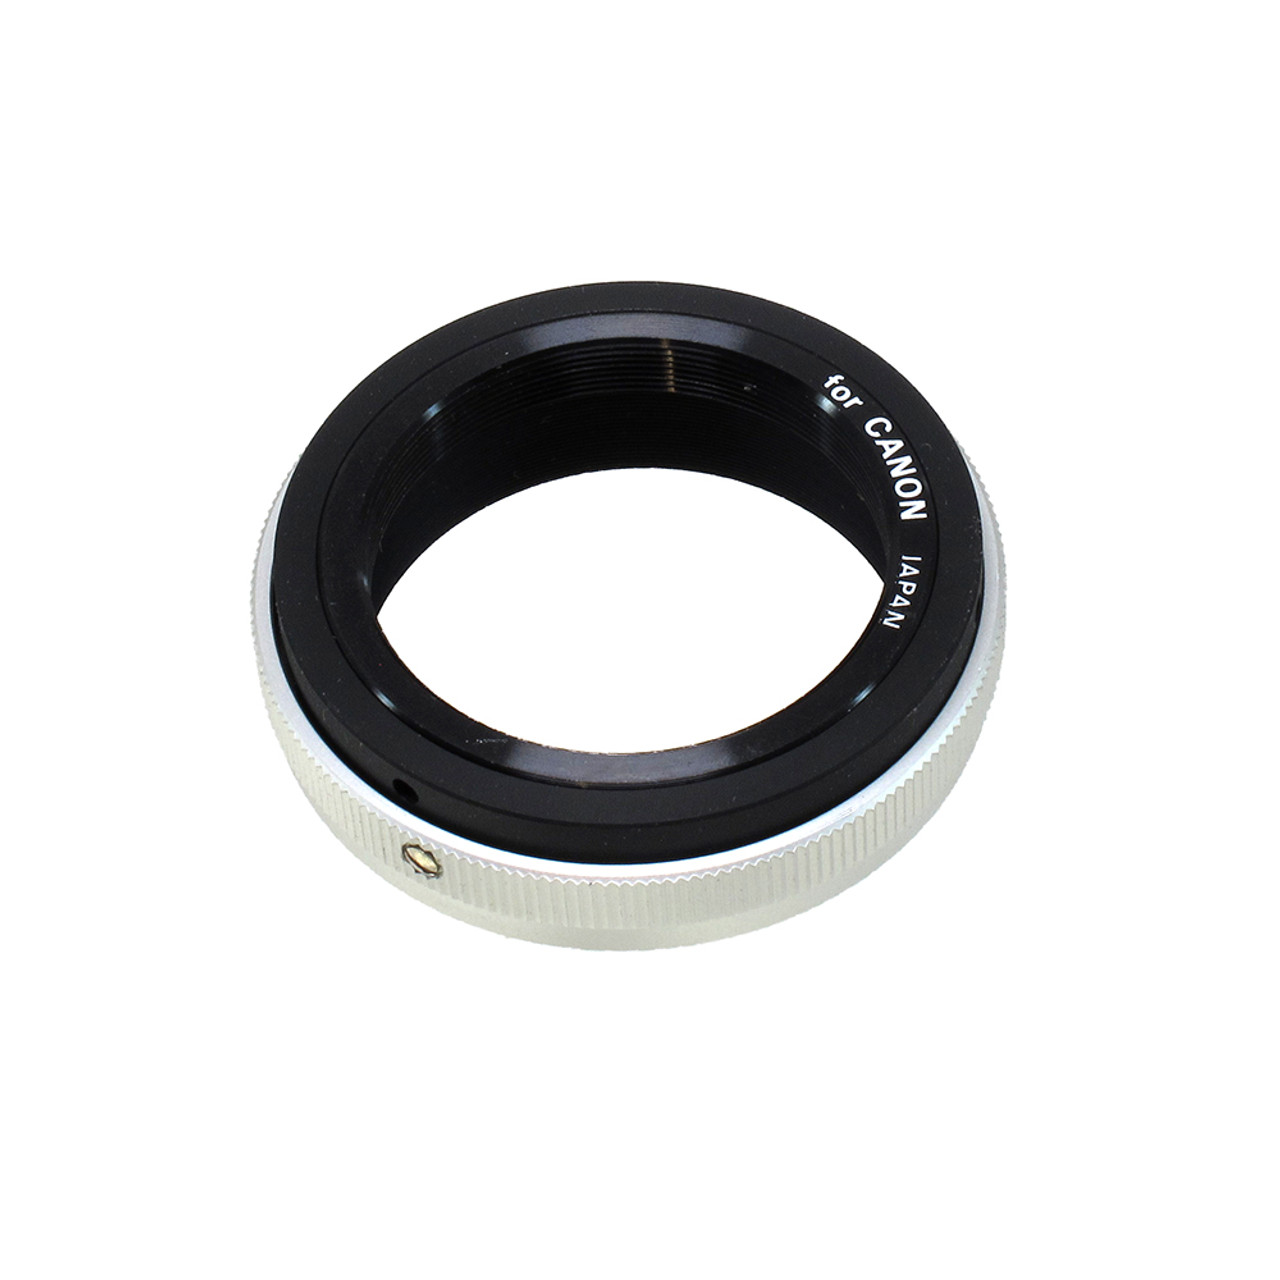 USED T-MOUNT CANON FD